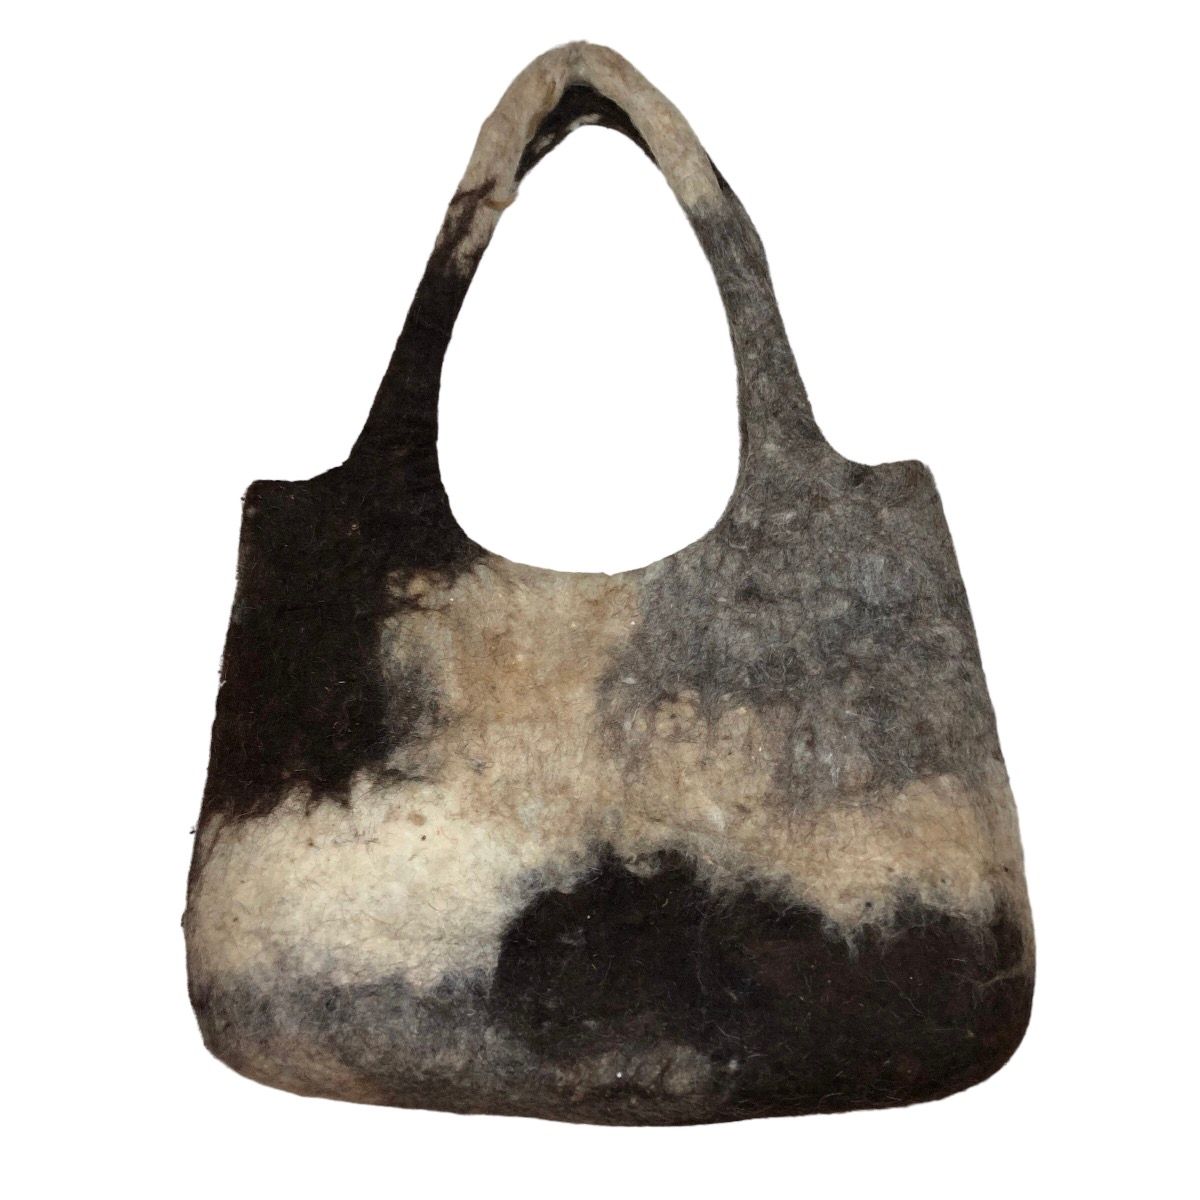 Japanese Brand - Pual Ce Cin Hairy Woolen Tote Bag - 1